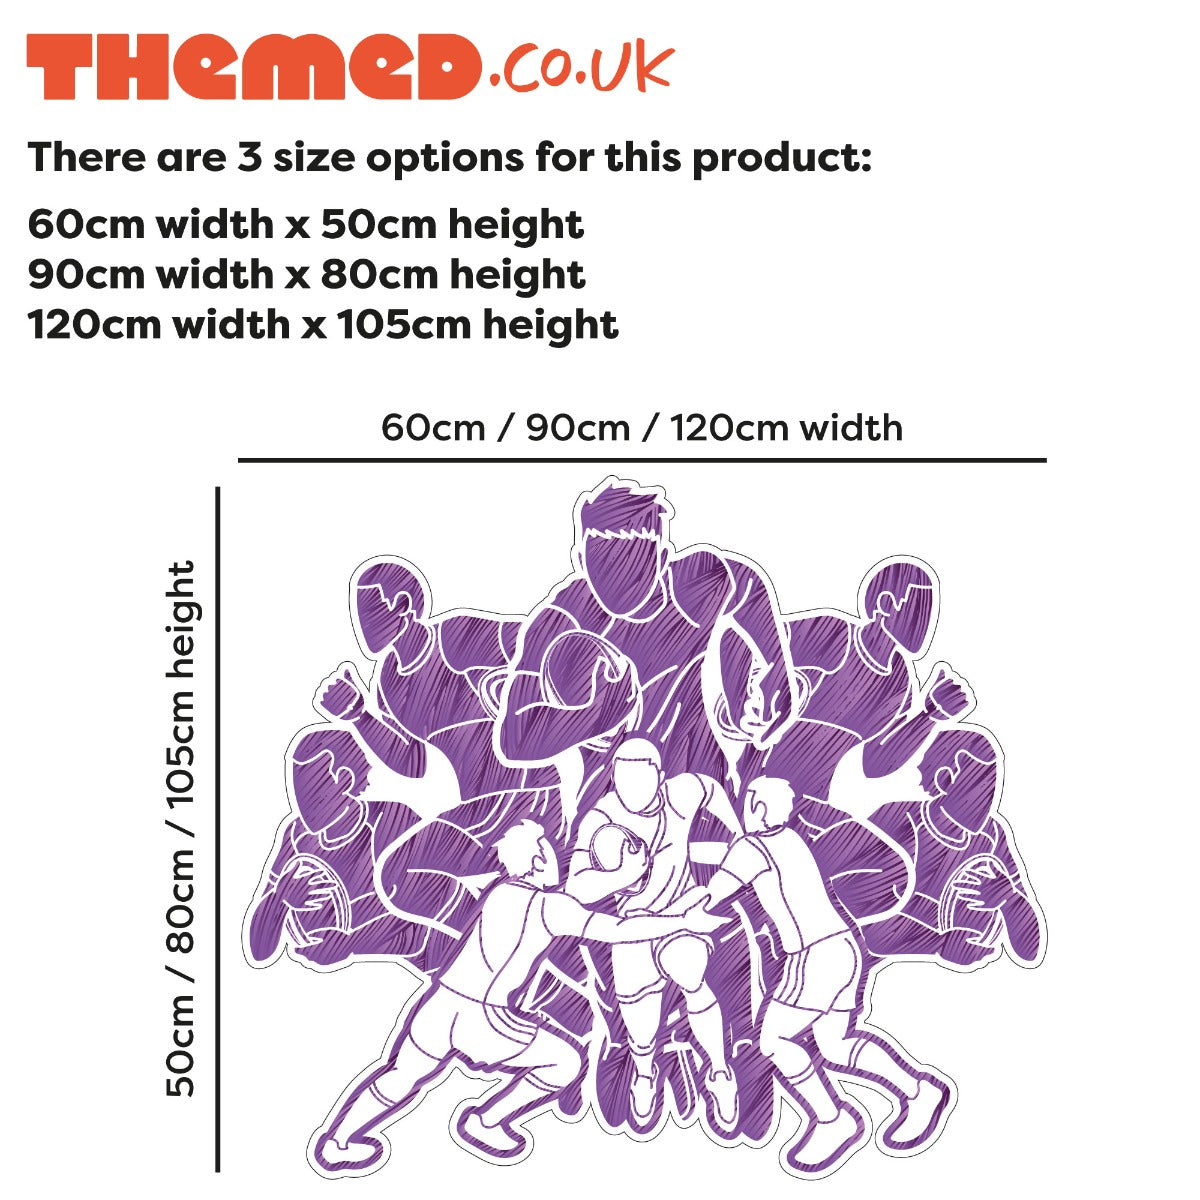 Rugby Wall Sticker - Rugby Players Group Colour Wall Decal Sports Art